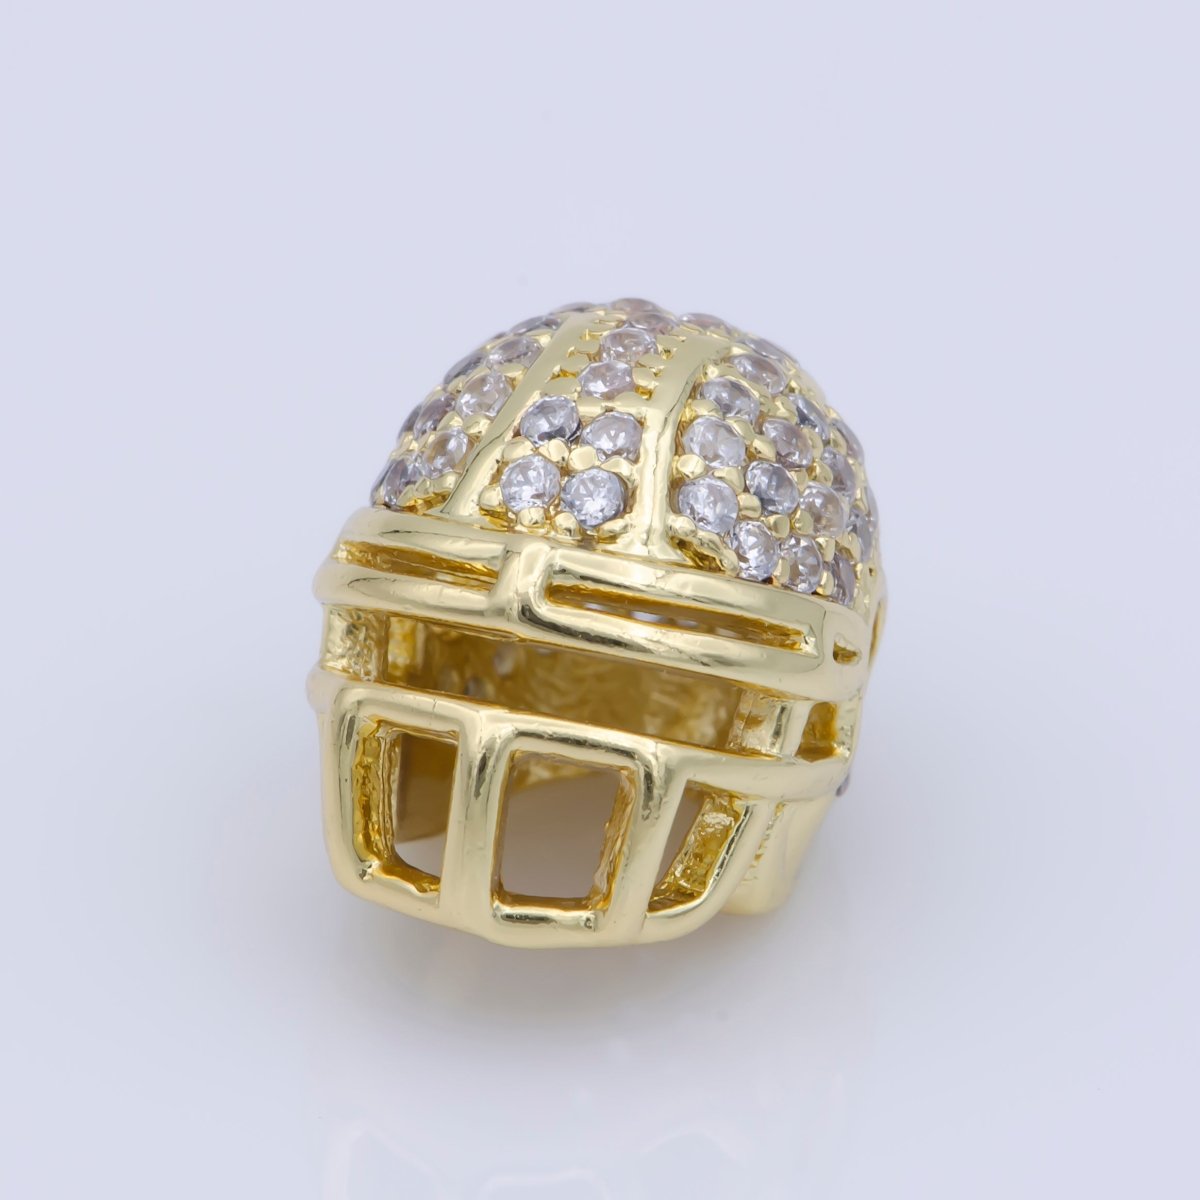 On Sale! CLEARANCE! Cubic Zirconia Crystal American Football Sport Hemet, Copper Gold Filled Charm CONNECTOR Bracelet Design Plated Material For Jewelry Making F-295 - DLUXCA